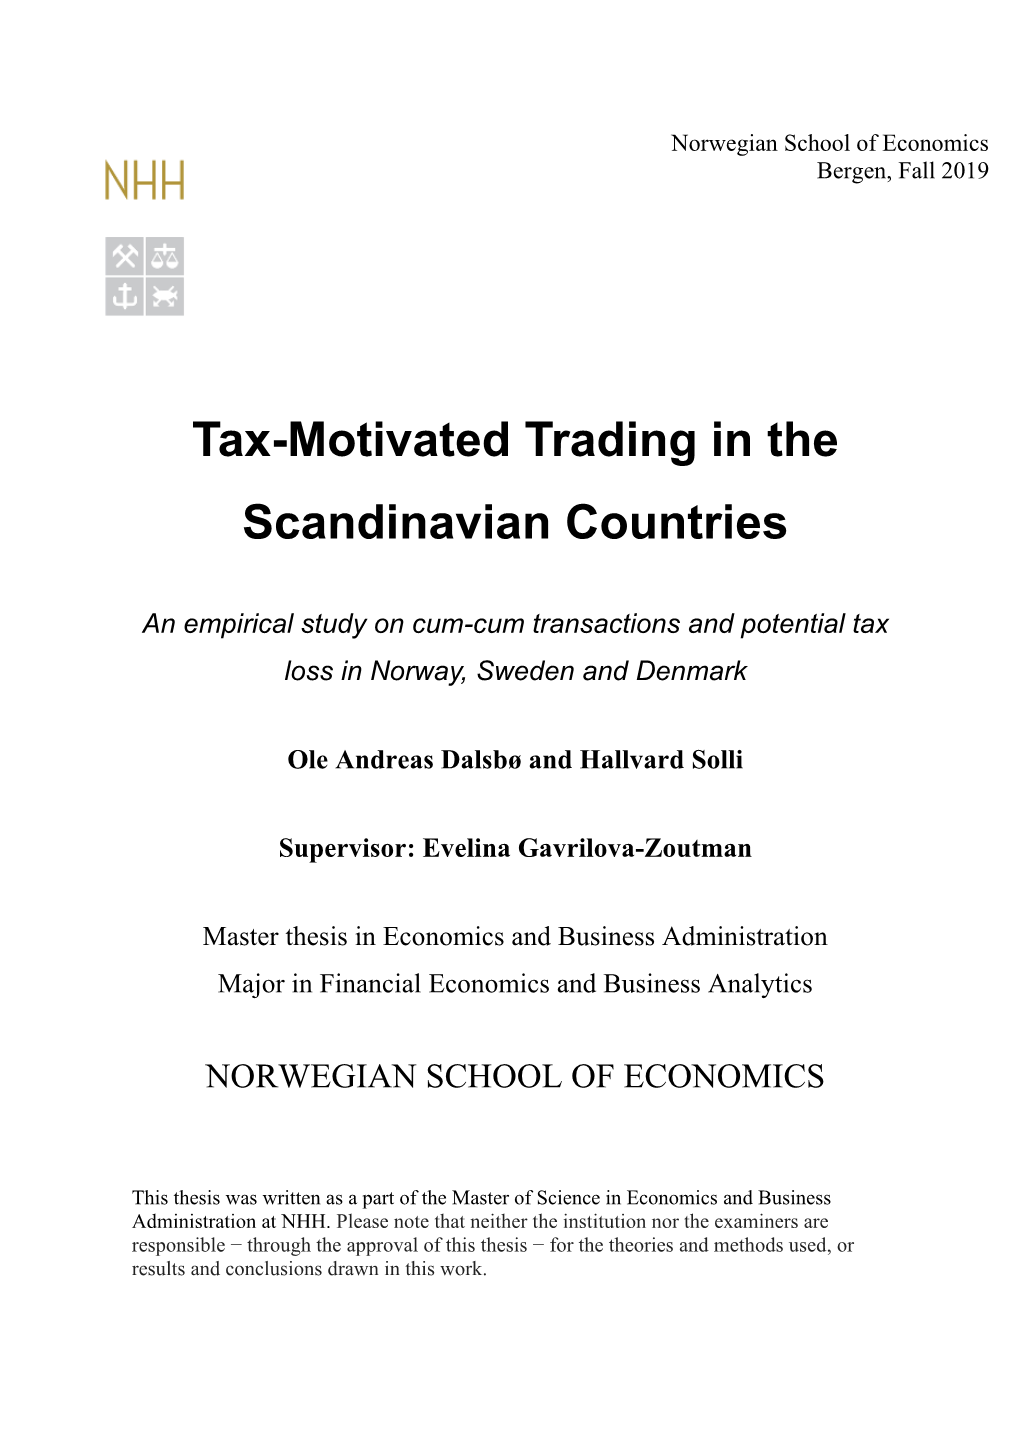 Tax-Motivated Trading in the Scandinavian Countries